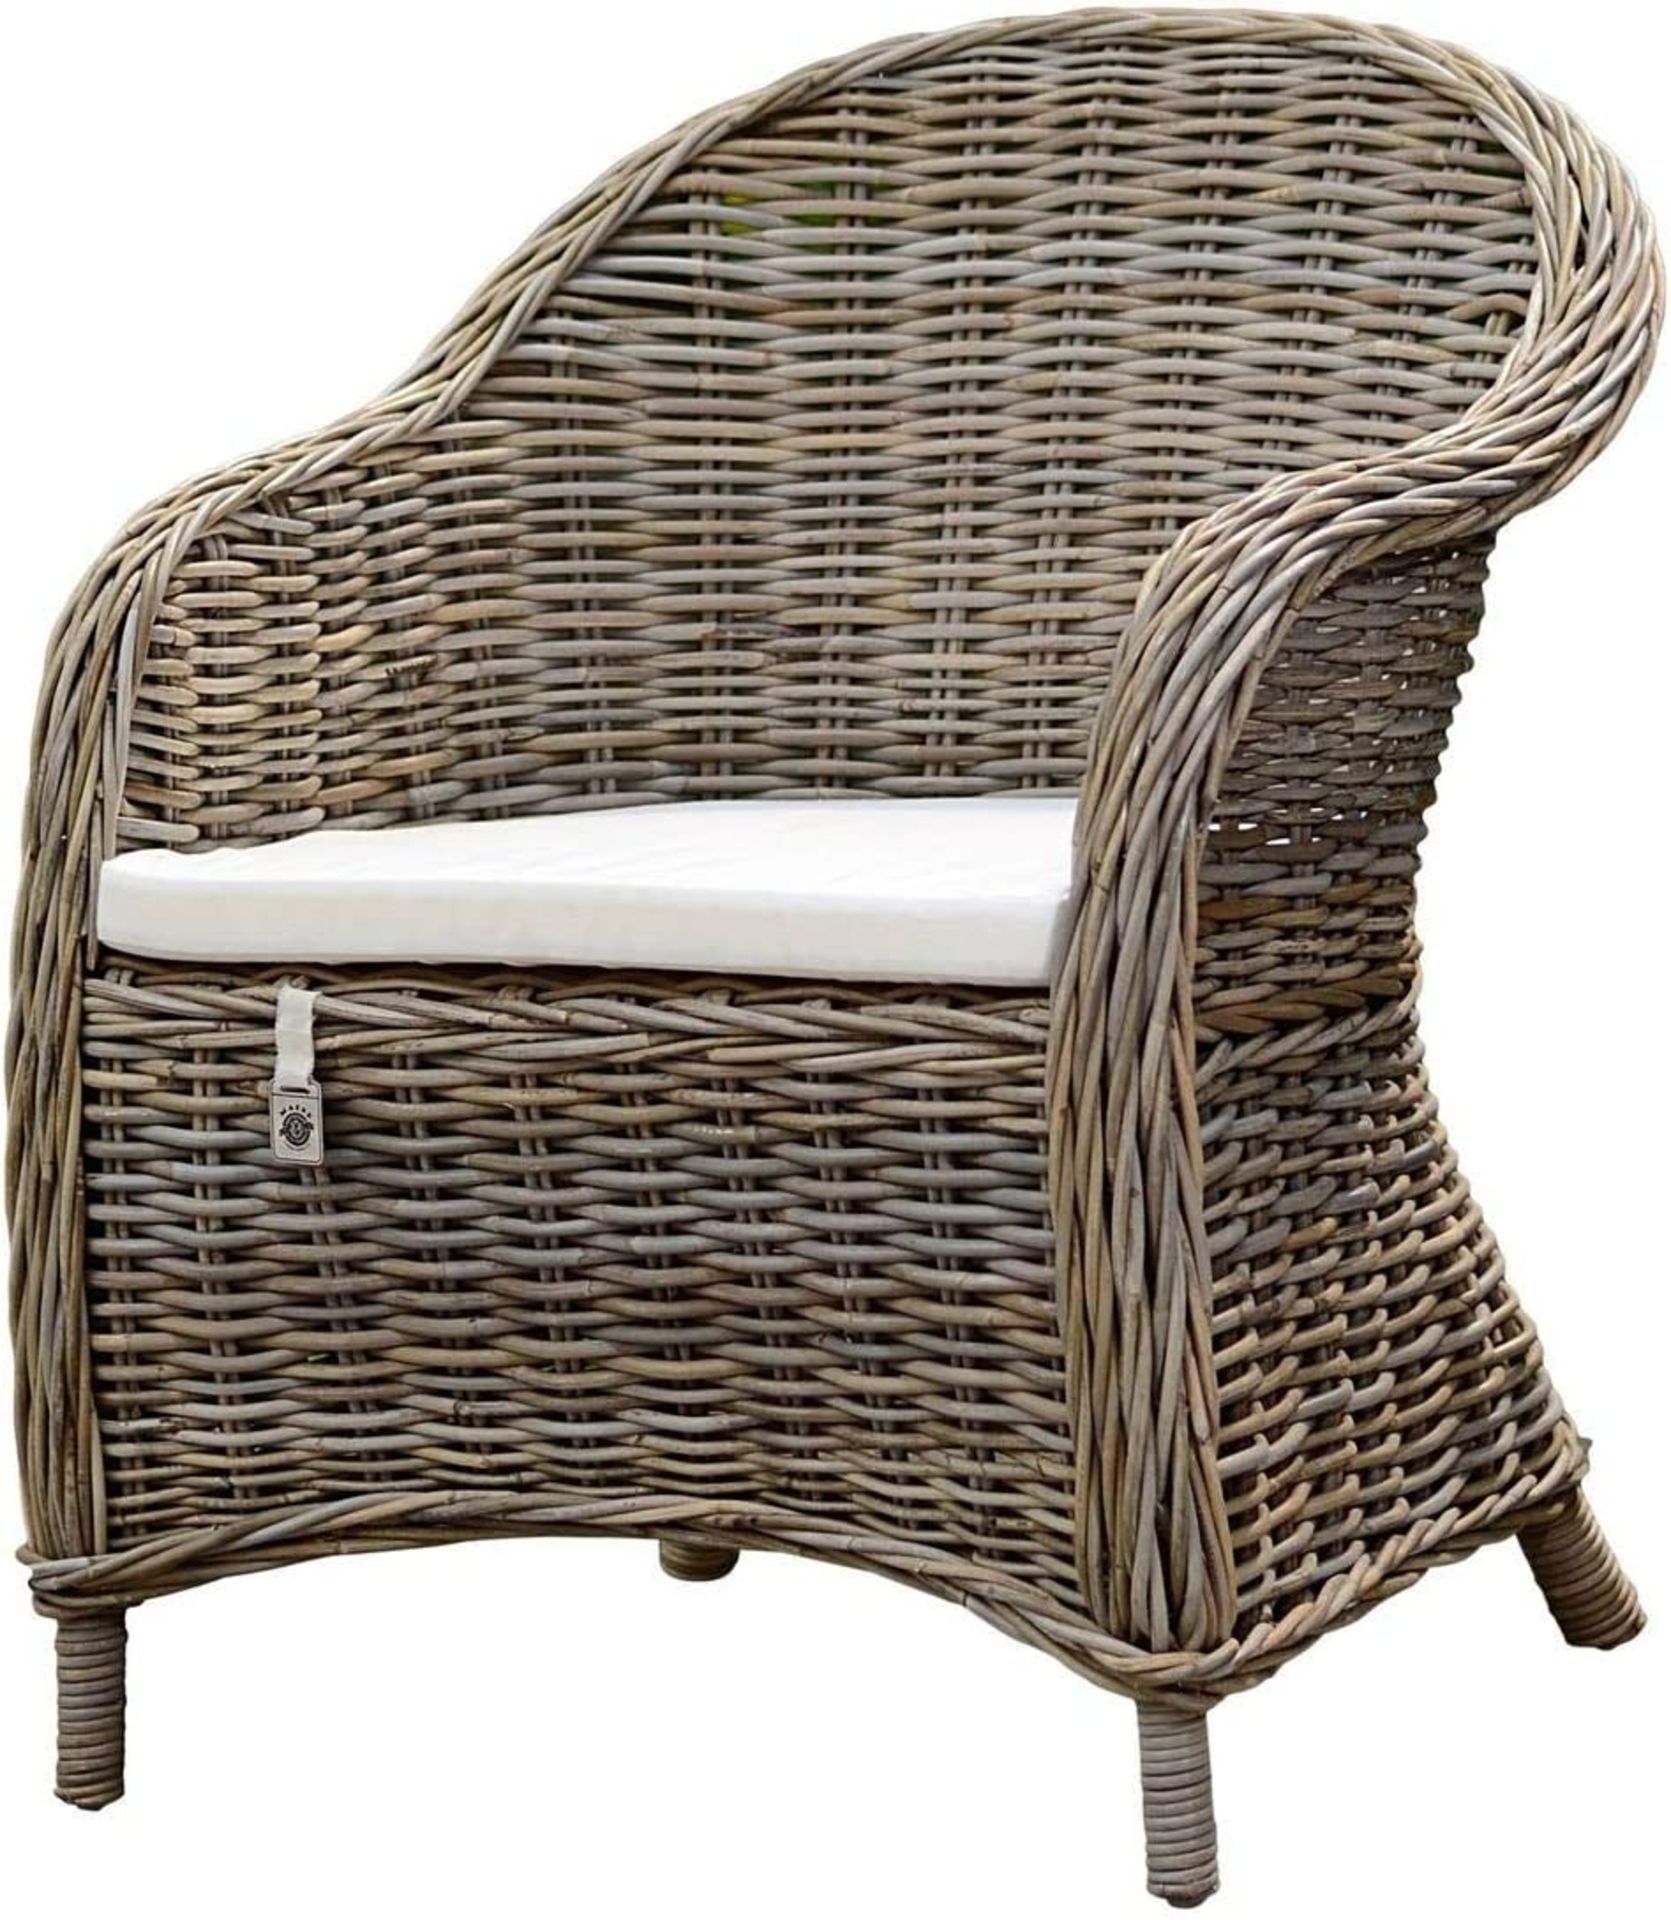 NEW & BOXED 2x Maine Furniture Co. Kubu Rattan Armchair with Cushion. (SR5). (SKU: M500156). STRONG, - Image 4 of 6